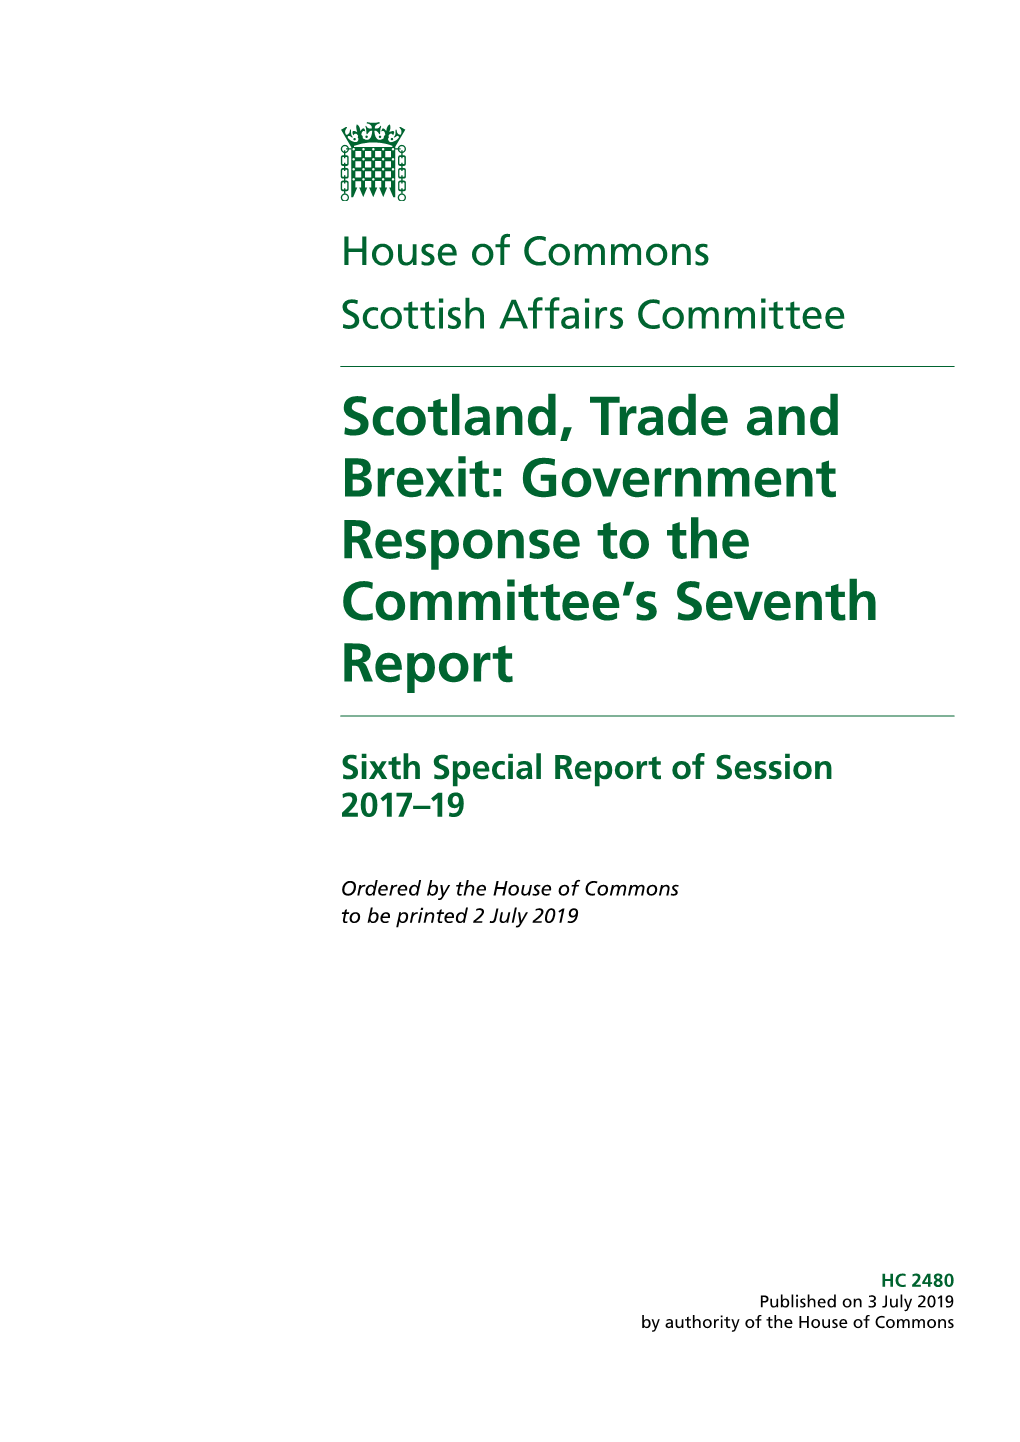 Scotland, Trade and Brexit: Government Response to the Committee’S Seventh Report